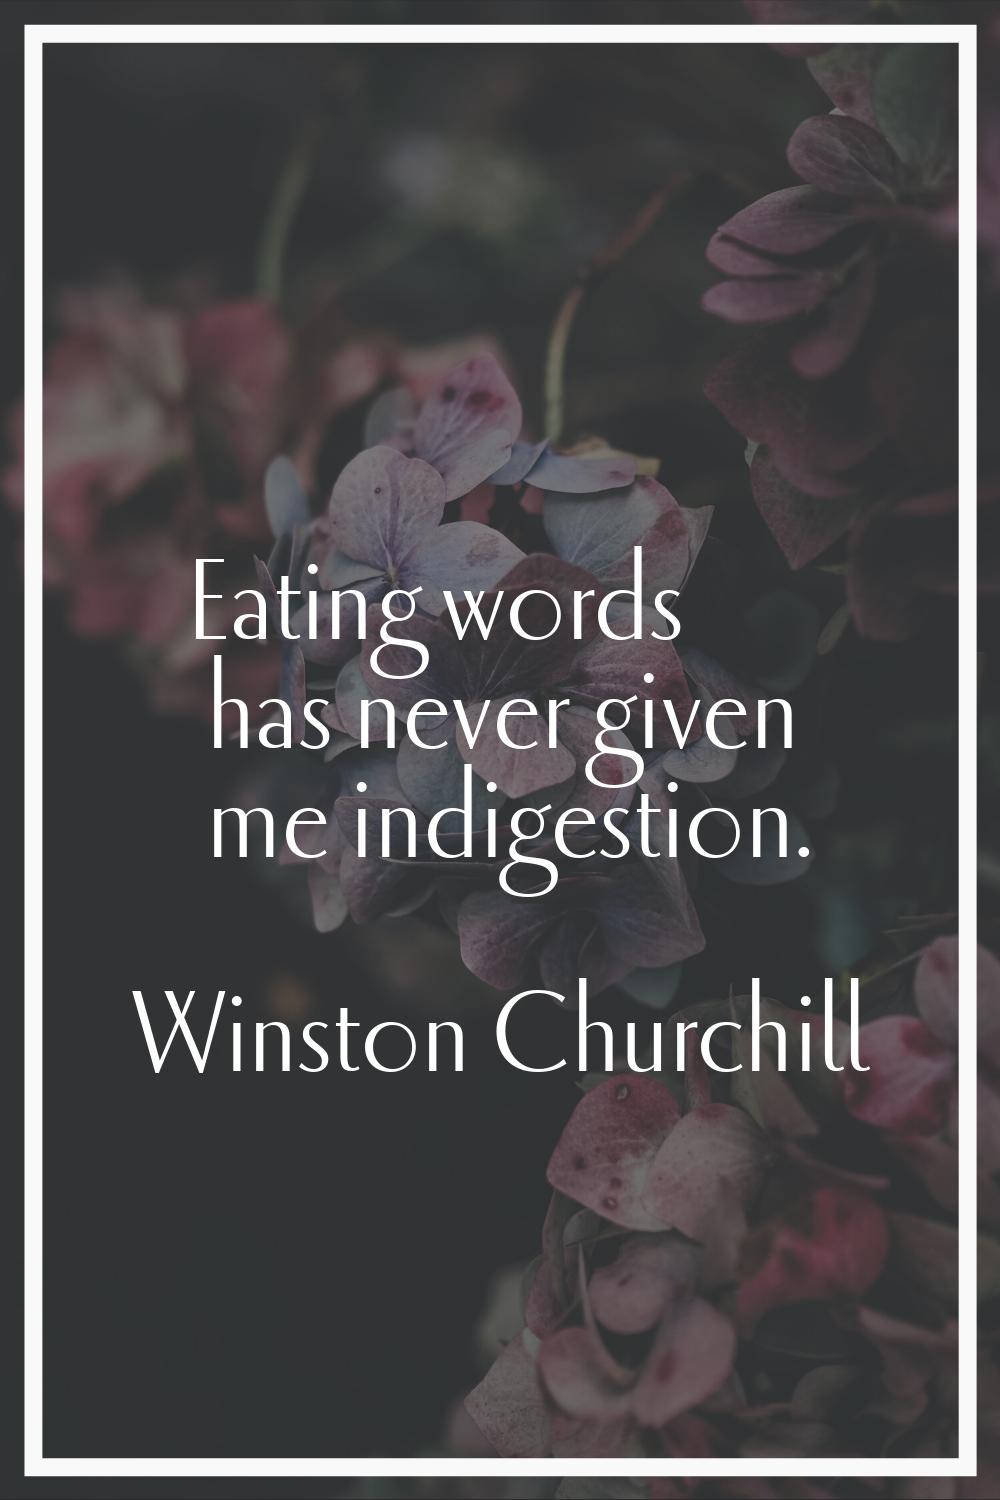 Eating words has never given me indigestion.